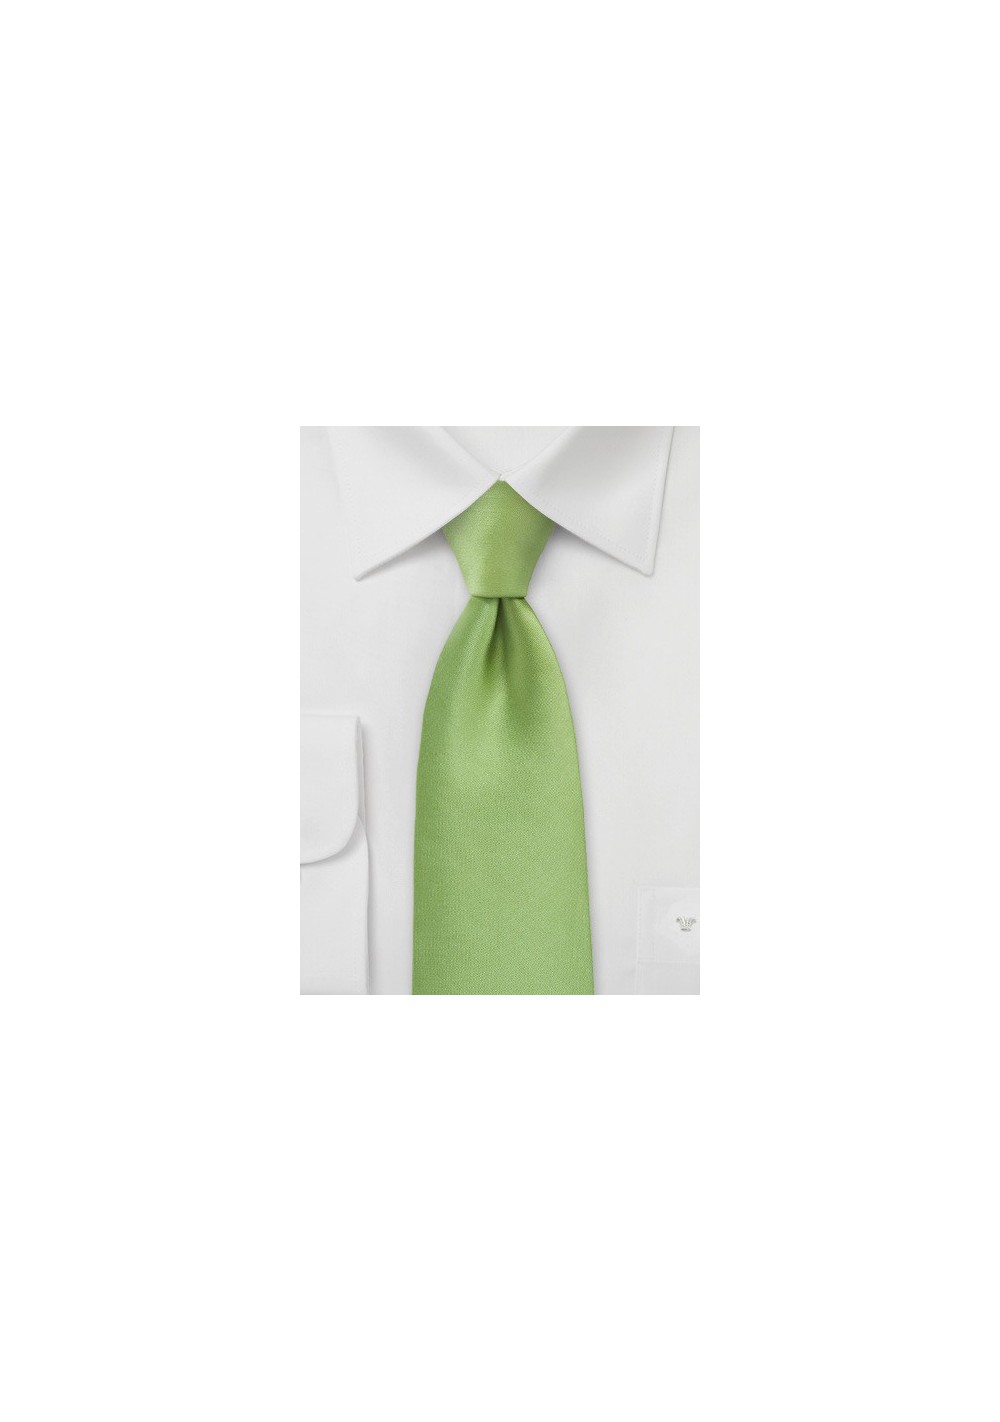 Lime Green Hued Tie in Solid Color